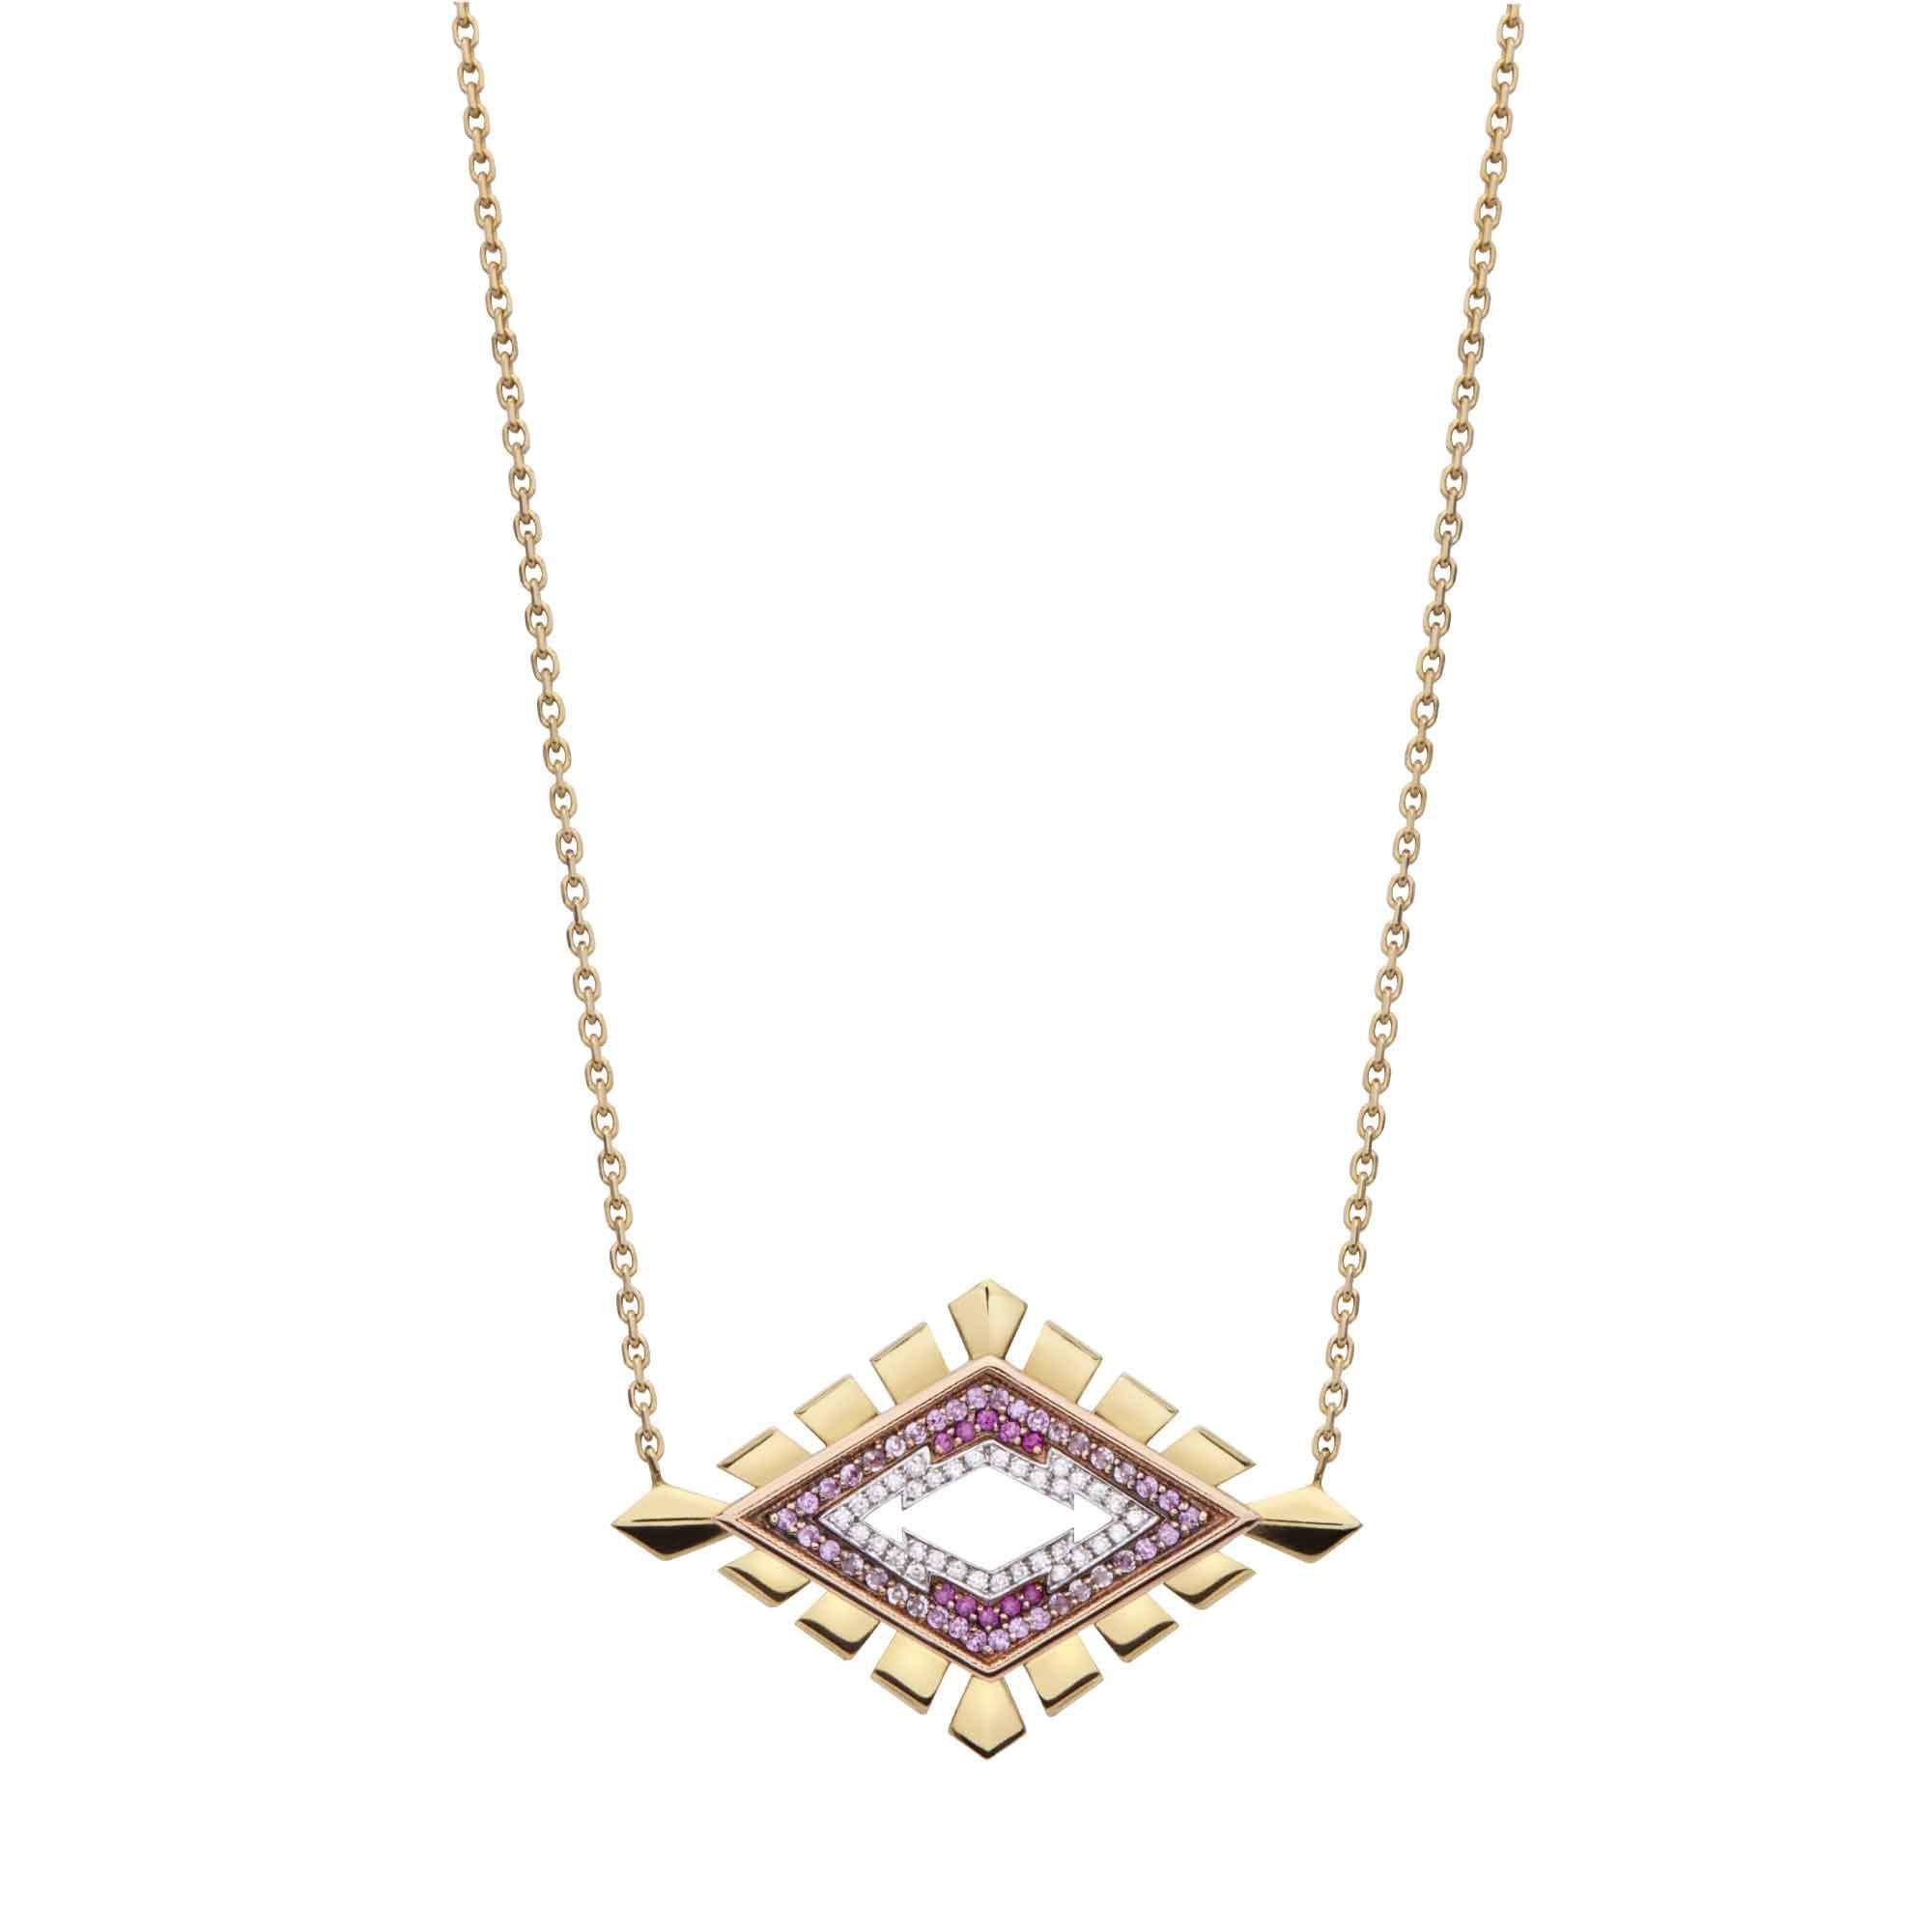 Jagged Rhombus Necklace